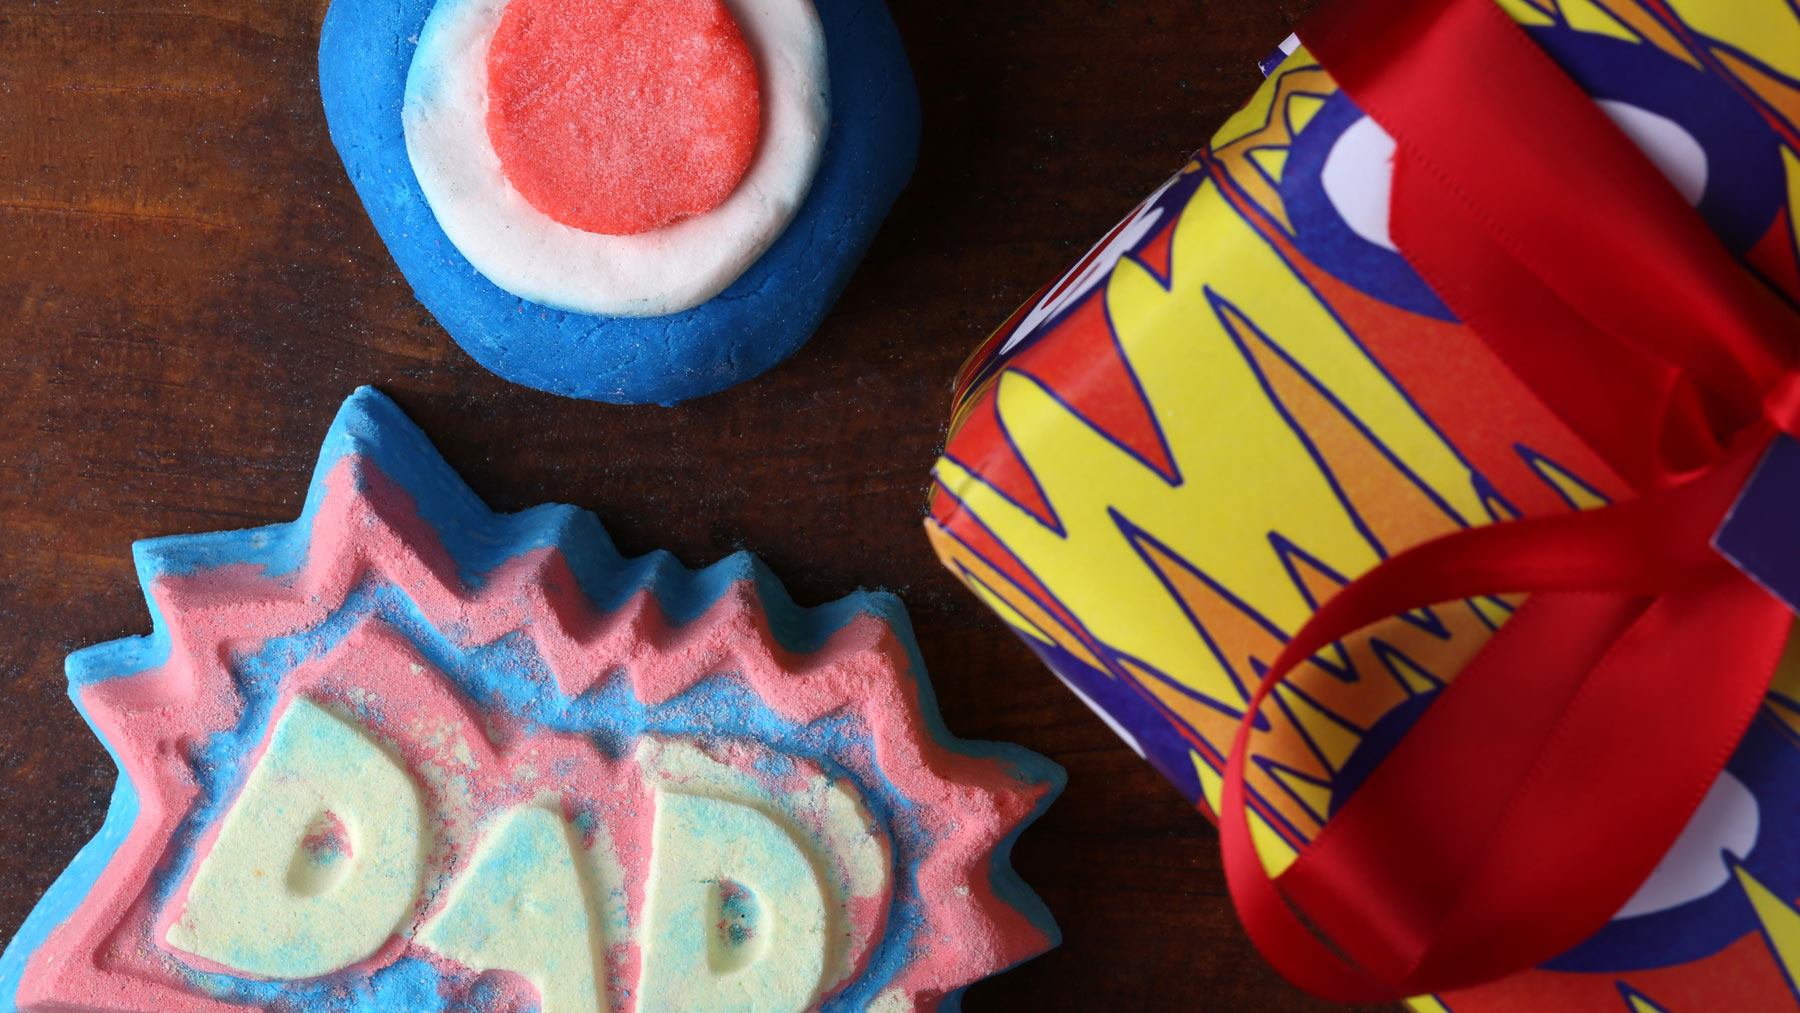 Lush Fathers Day Collection 2016